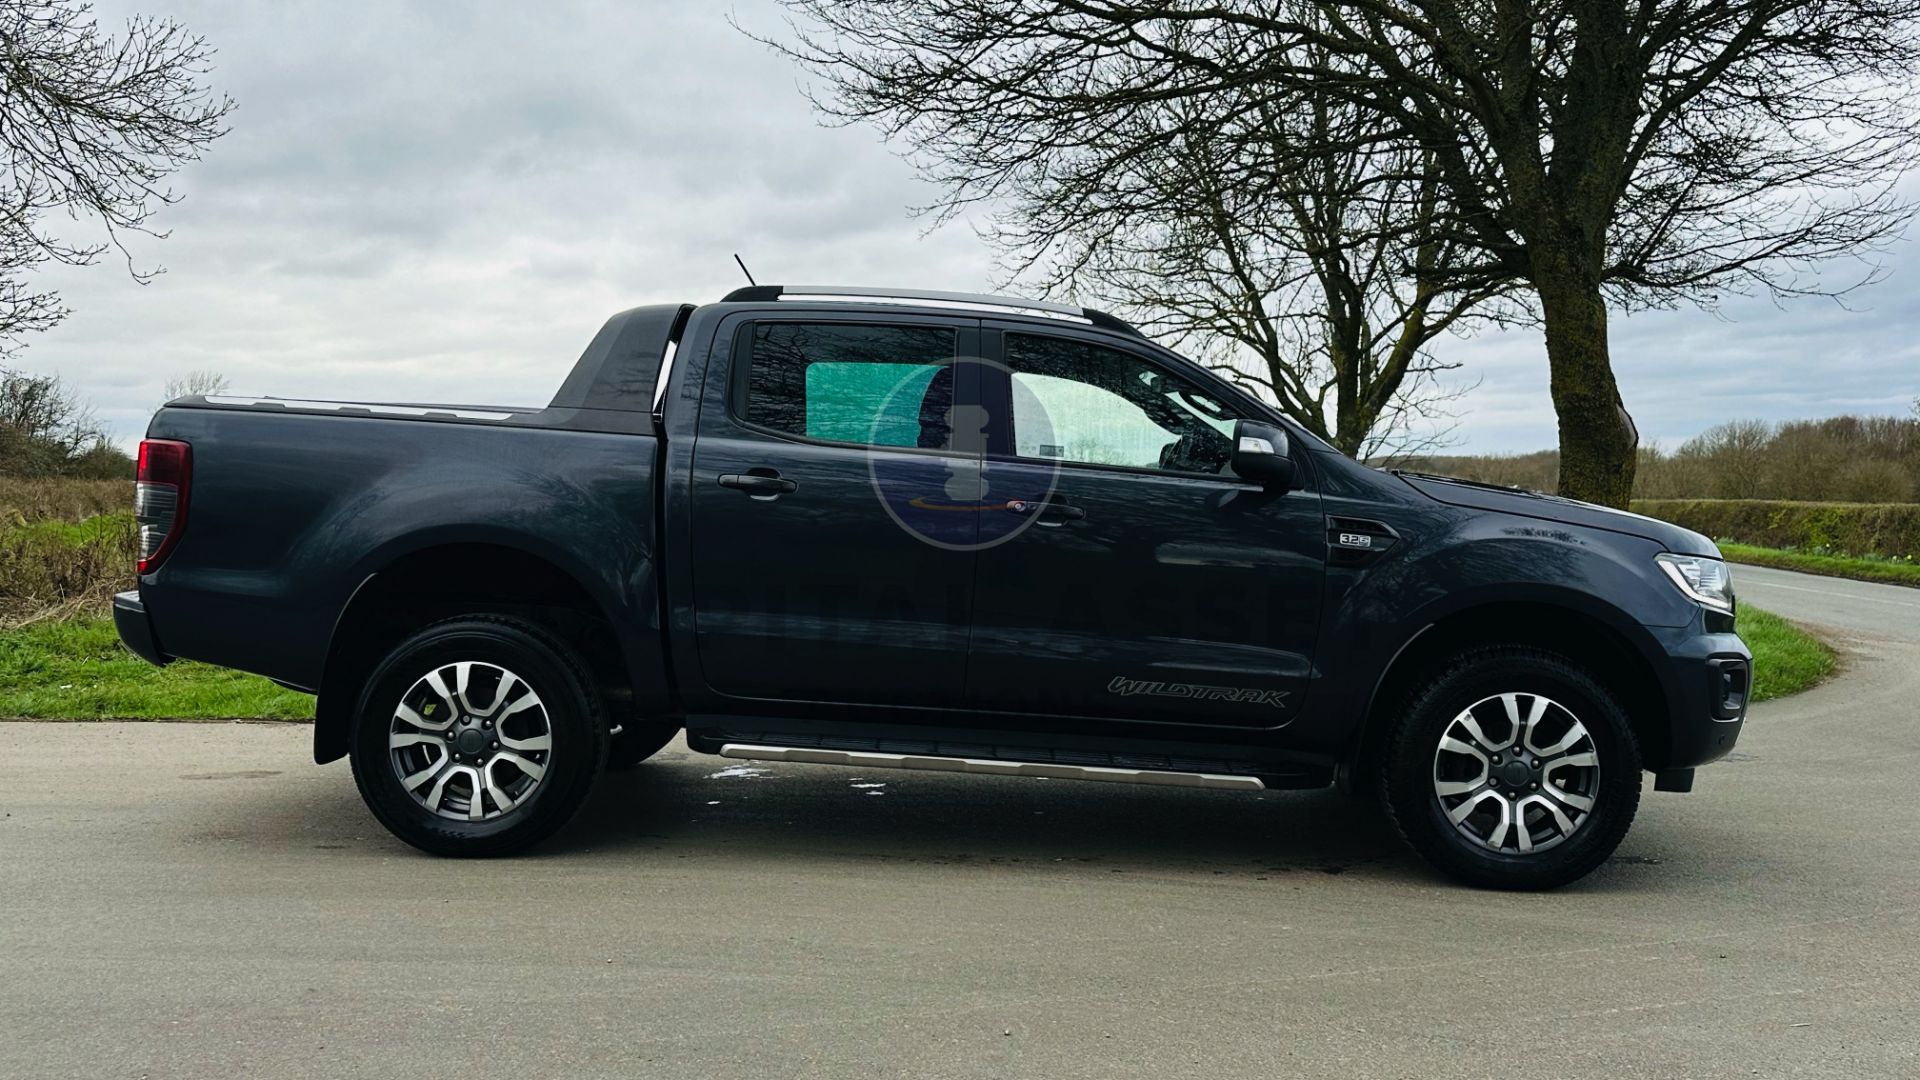 FORD RANGER *WILDTRAK EDITION* DOUBLE CAB PICK-UP (2020 - EURO 6) 3.2 TDCI - AUTOMATIC *HUGE SPEC* - Image 14 of 49